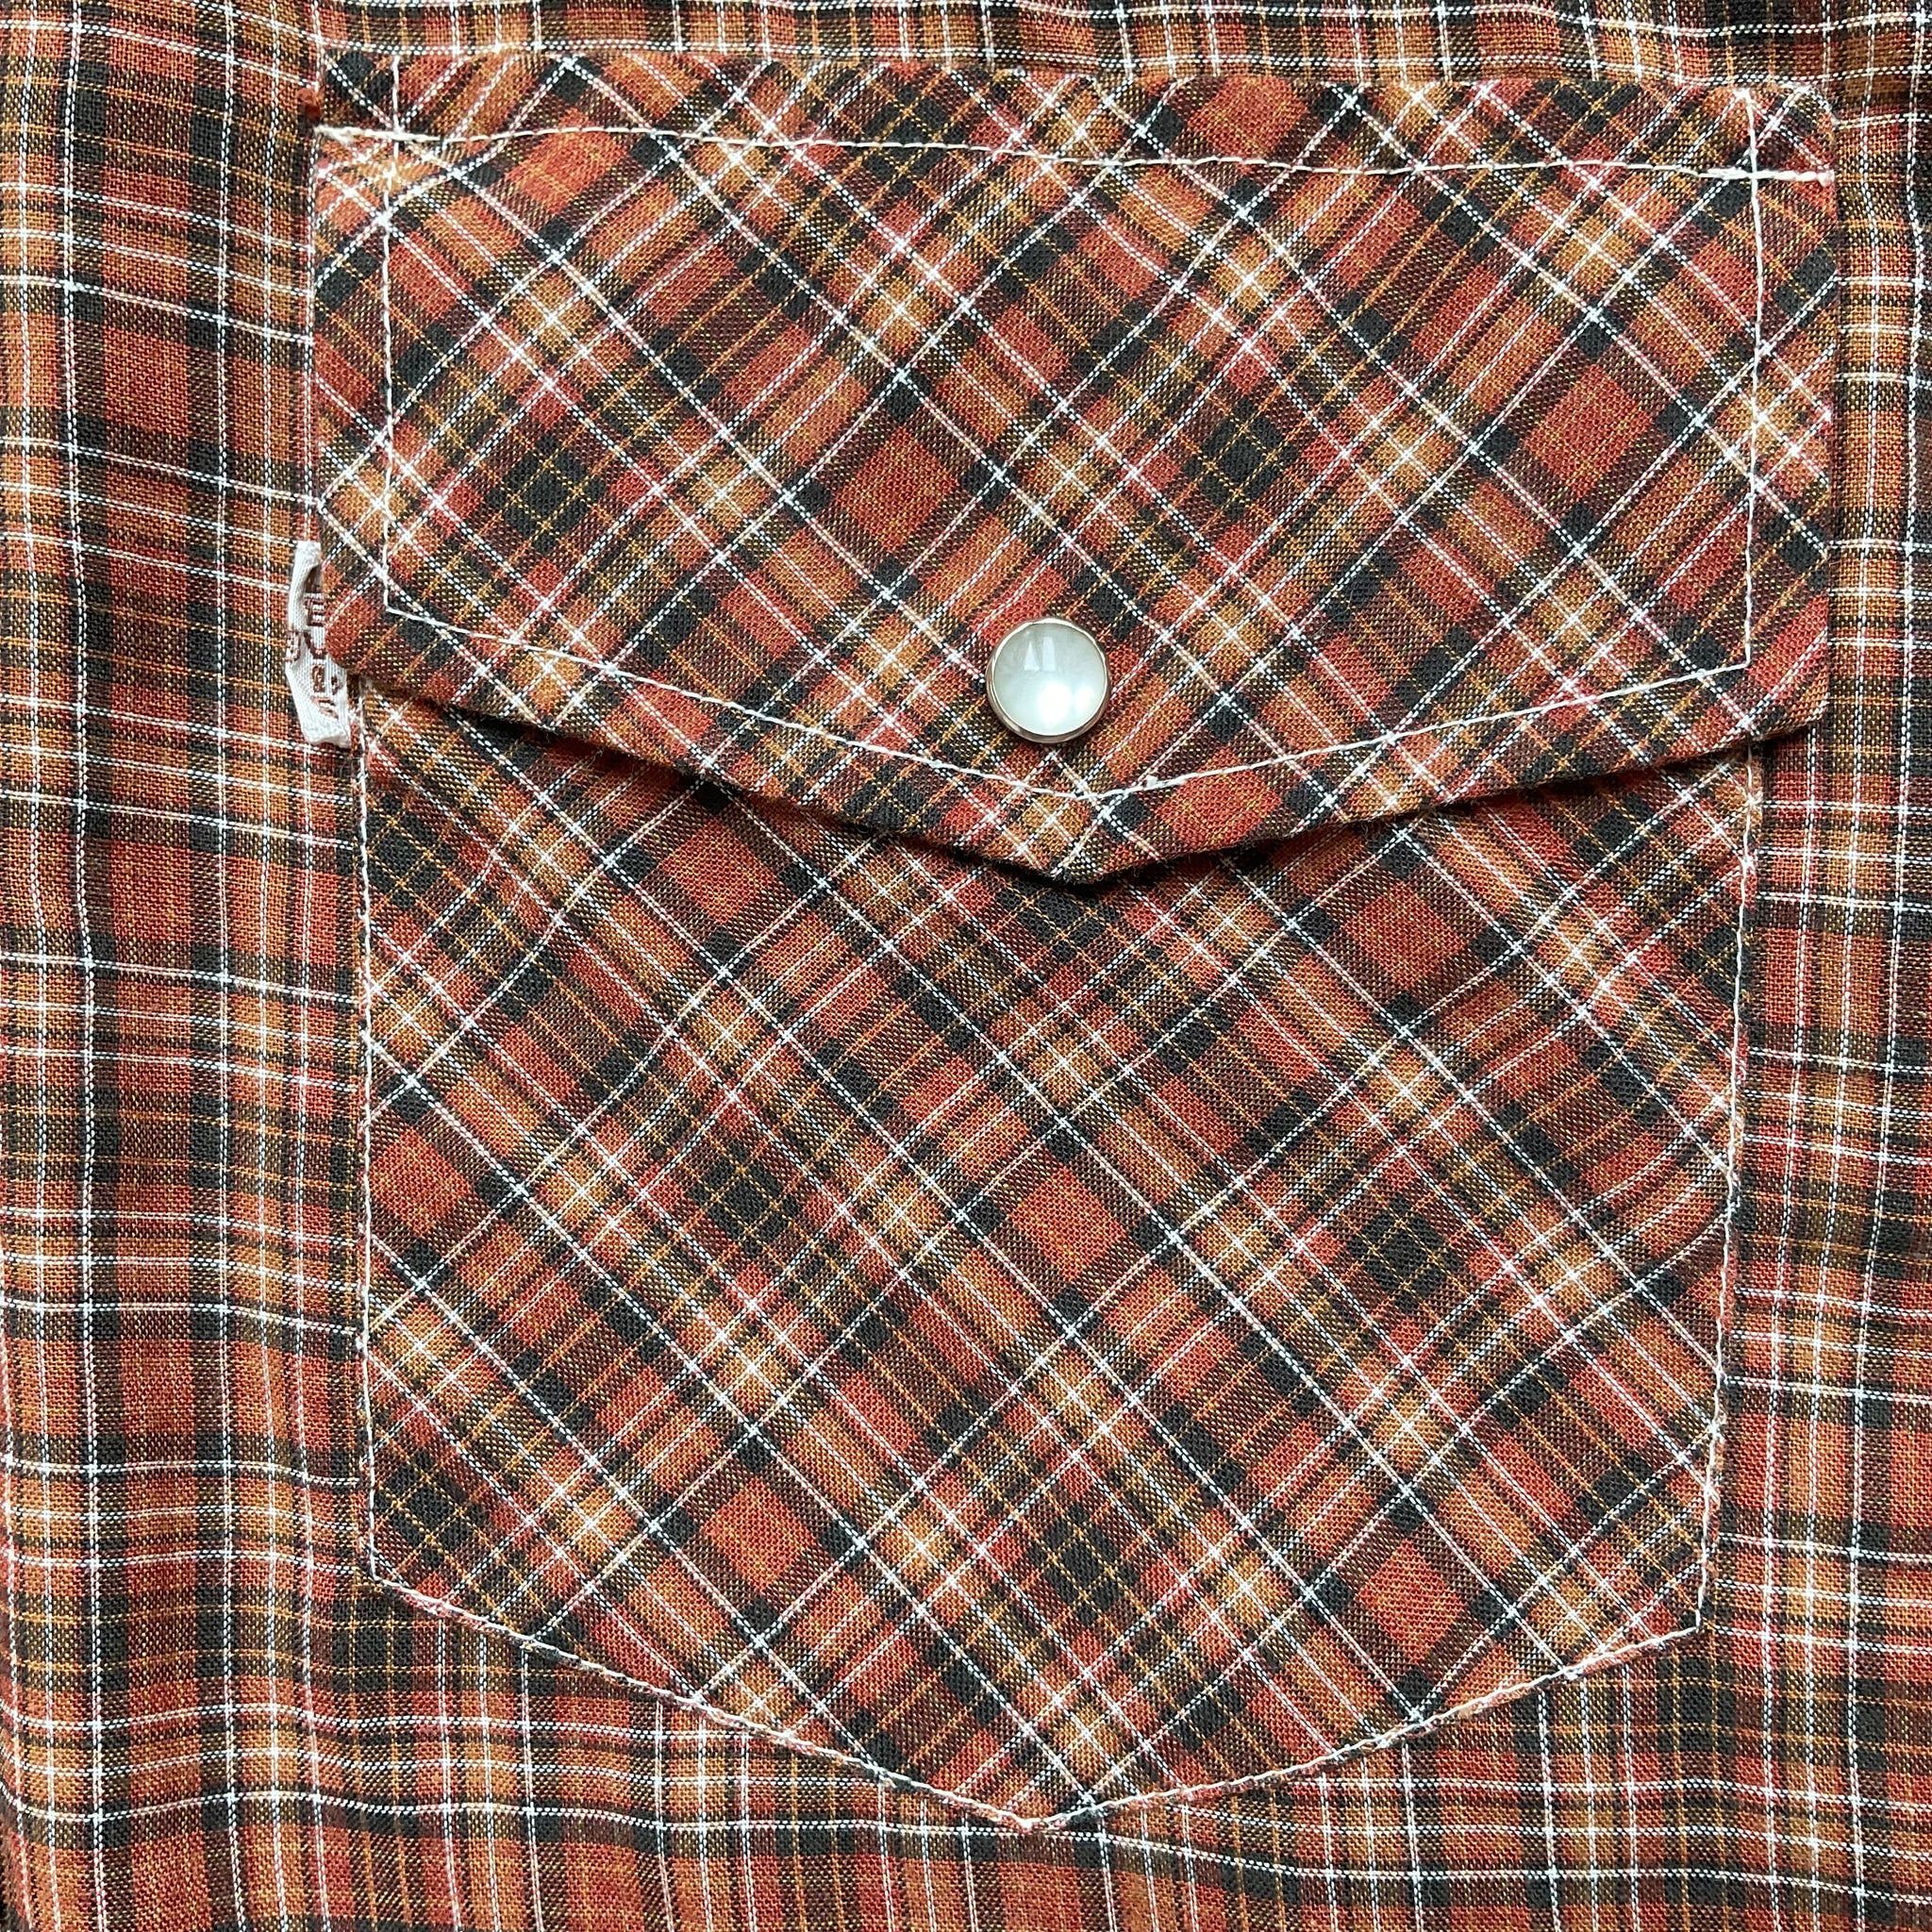 LEVI’S Vintage©️1978 BIG E Mens Western Shirt Rust-Black Check with Pearl Snaps by Levi’s Sportswear®️